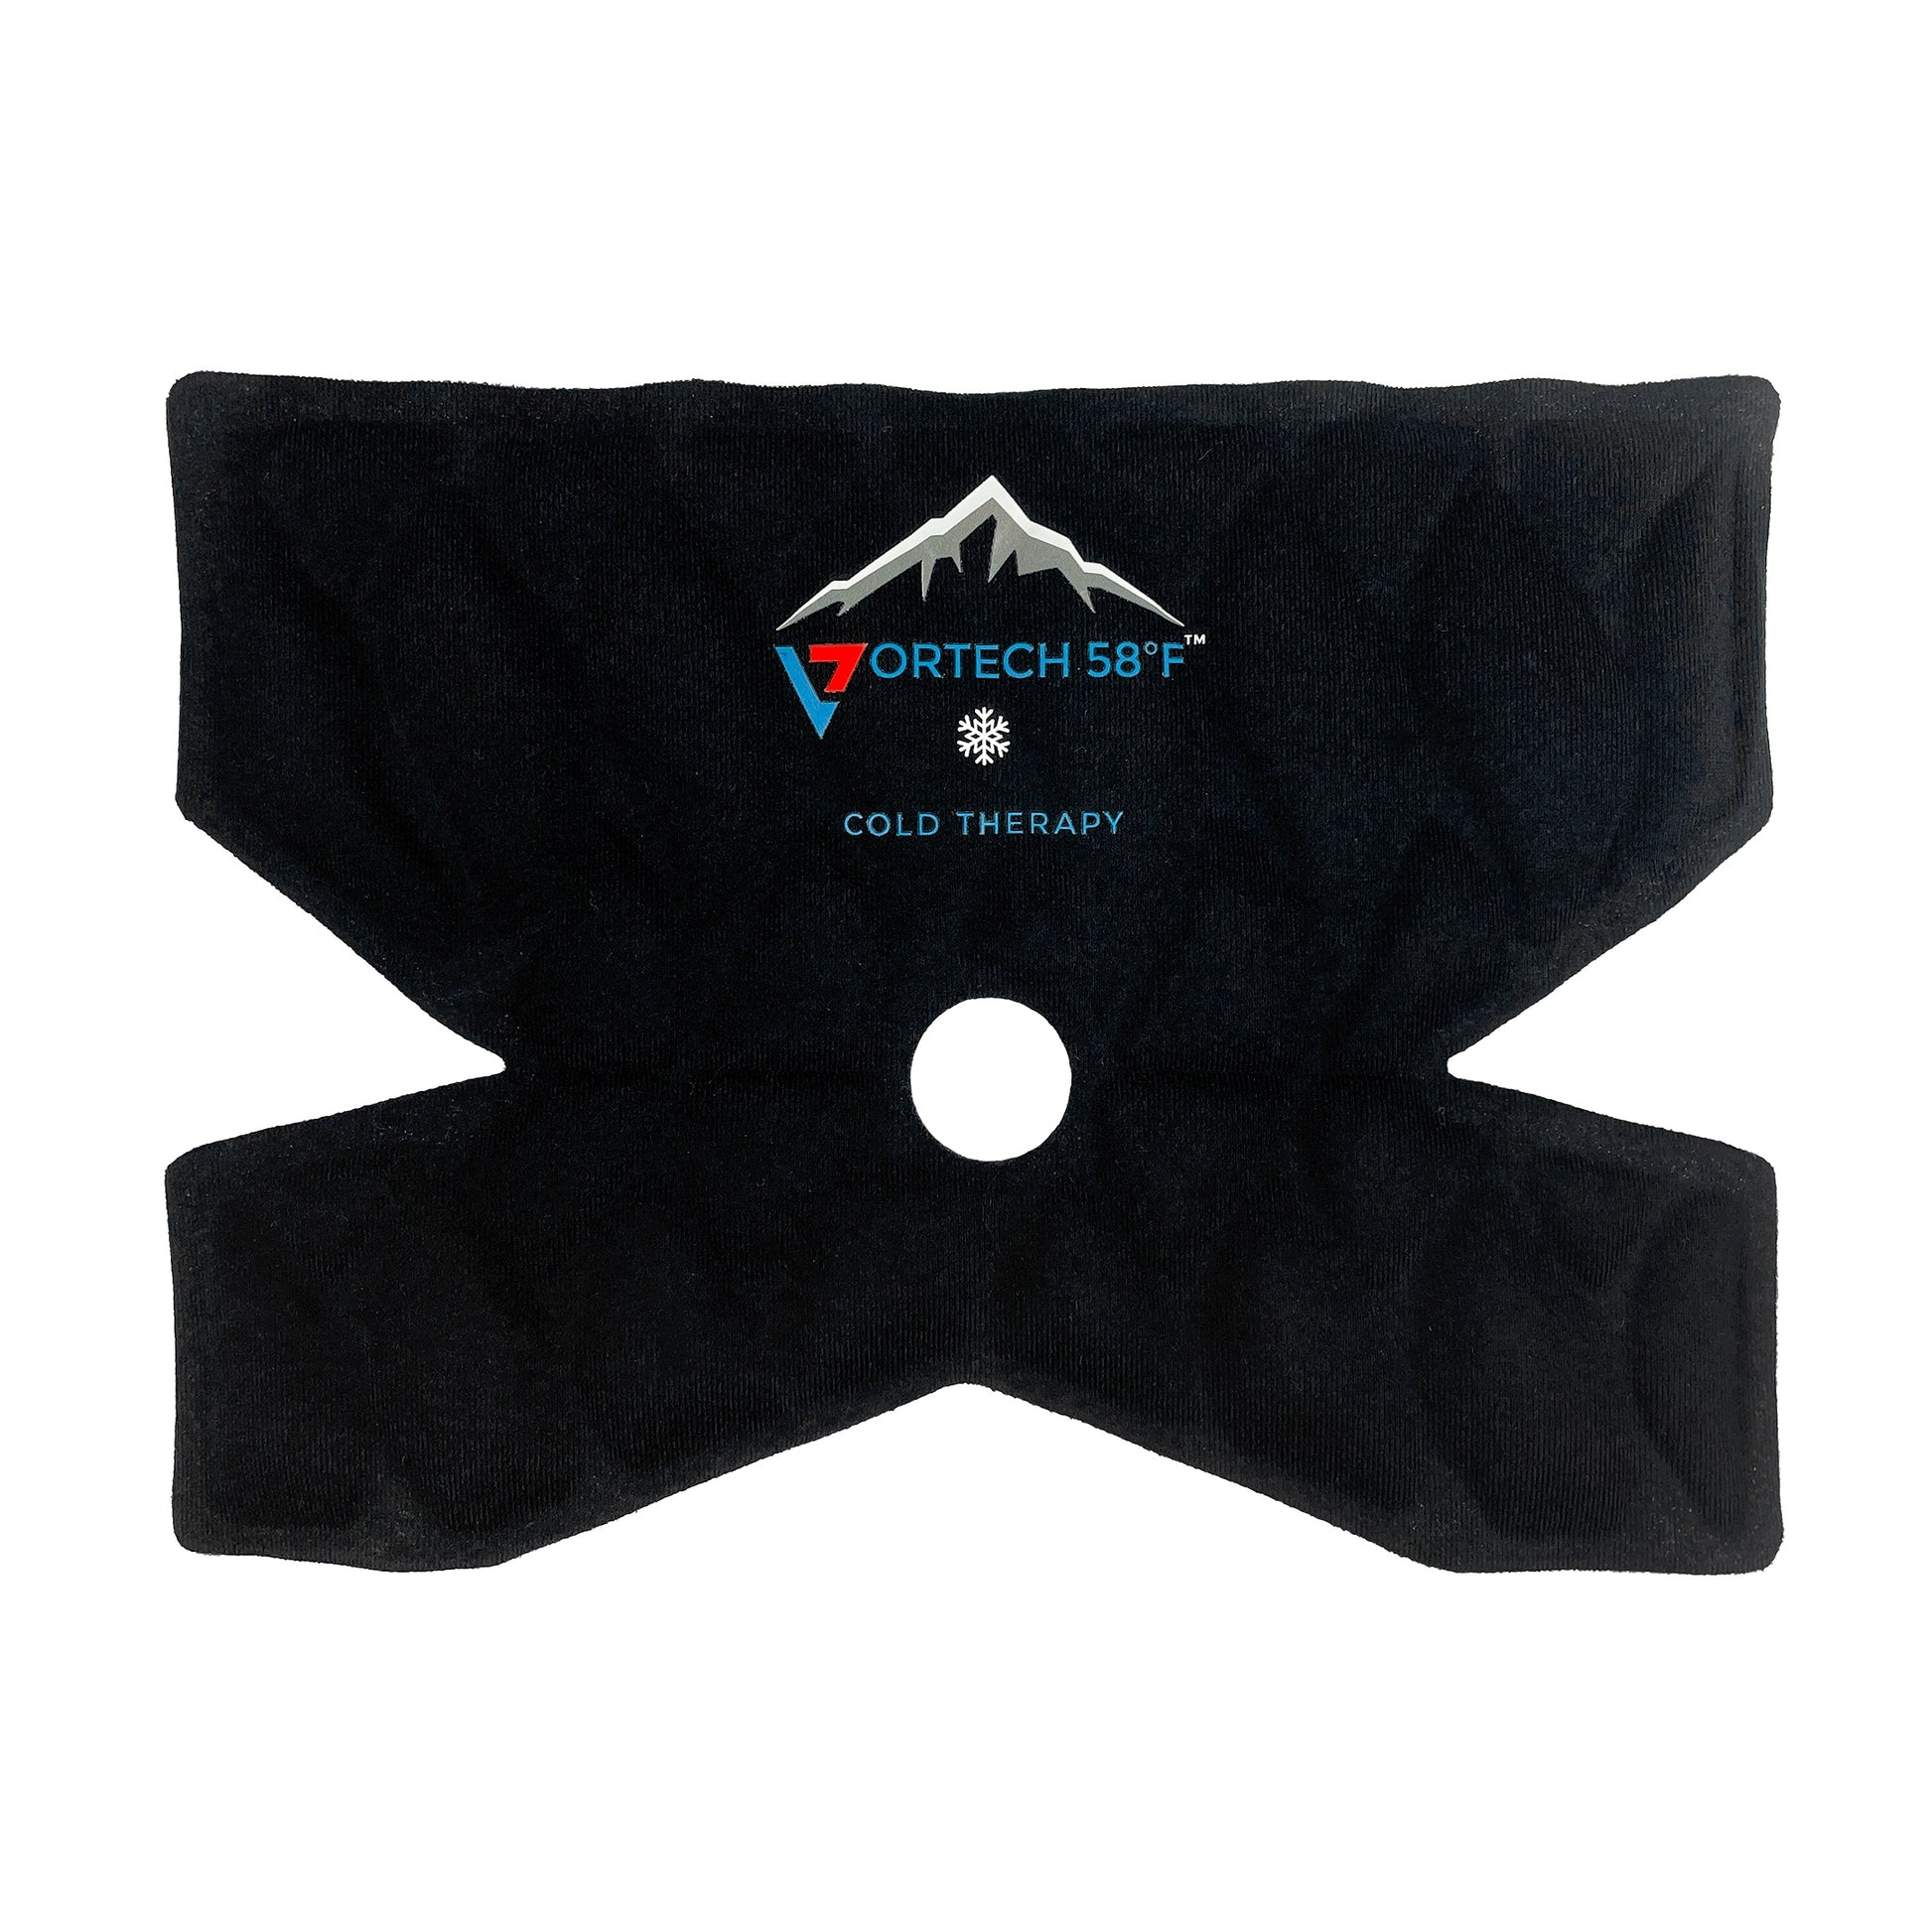 Vortech Elbow Wrap for Cold Therapy